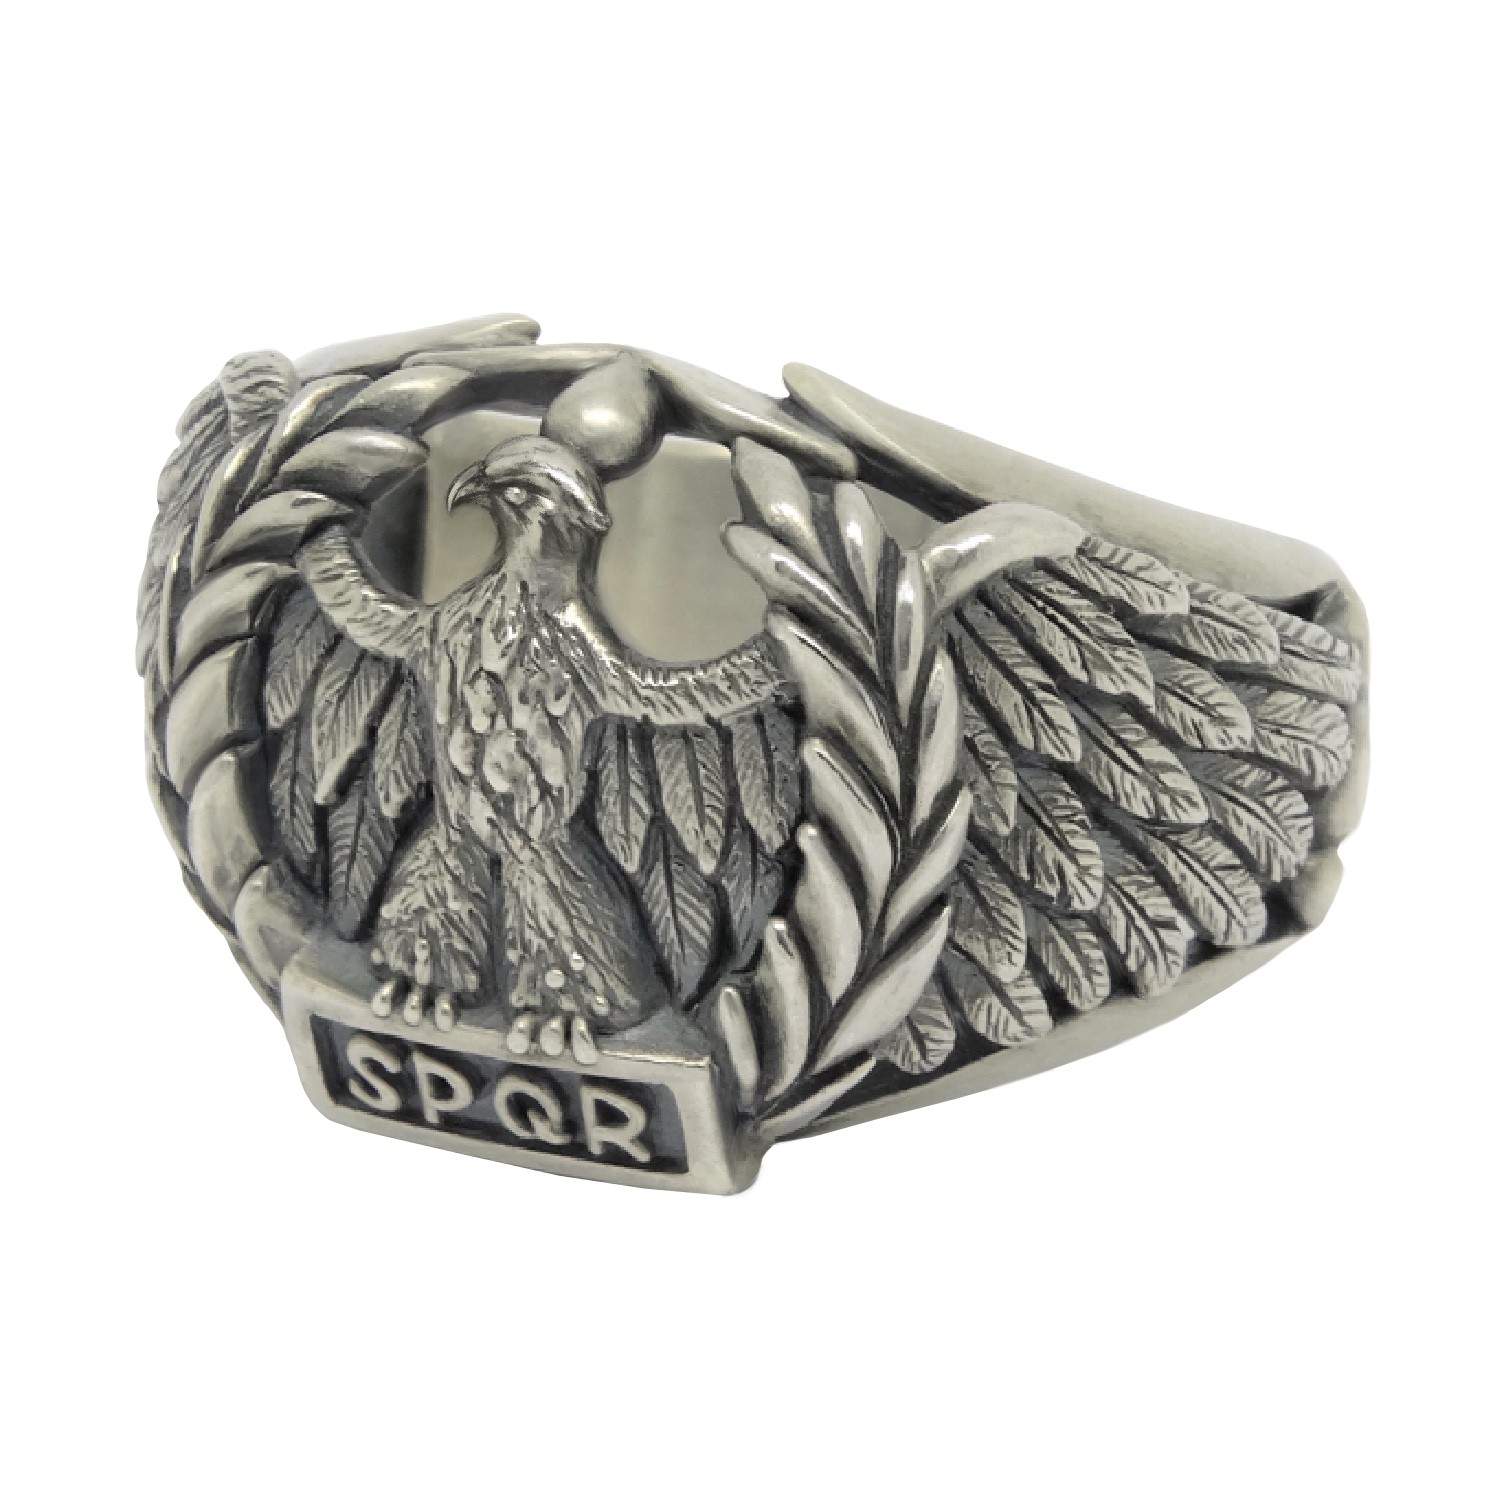 Details about   SPQR Ring Imperial Roman Empire Eagle Rome Legion Gladiator Soldier 925 Silver